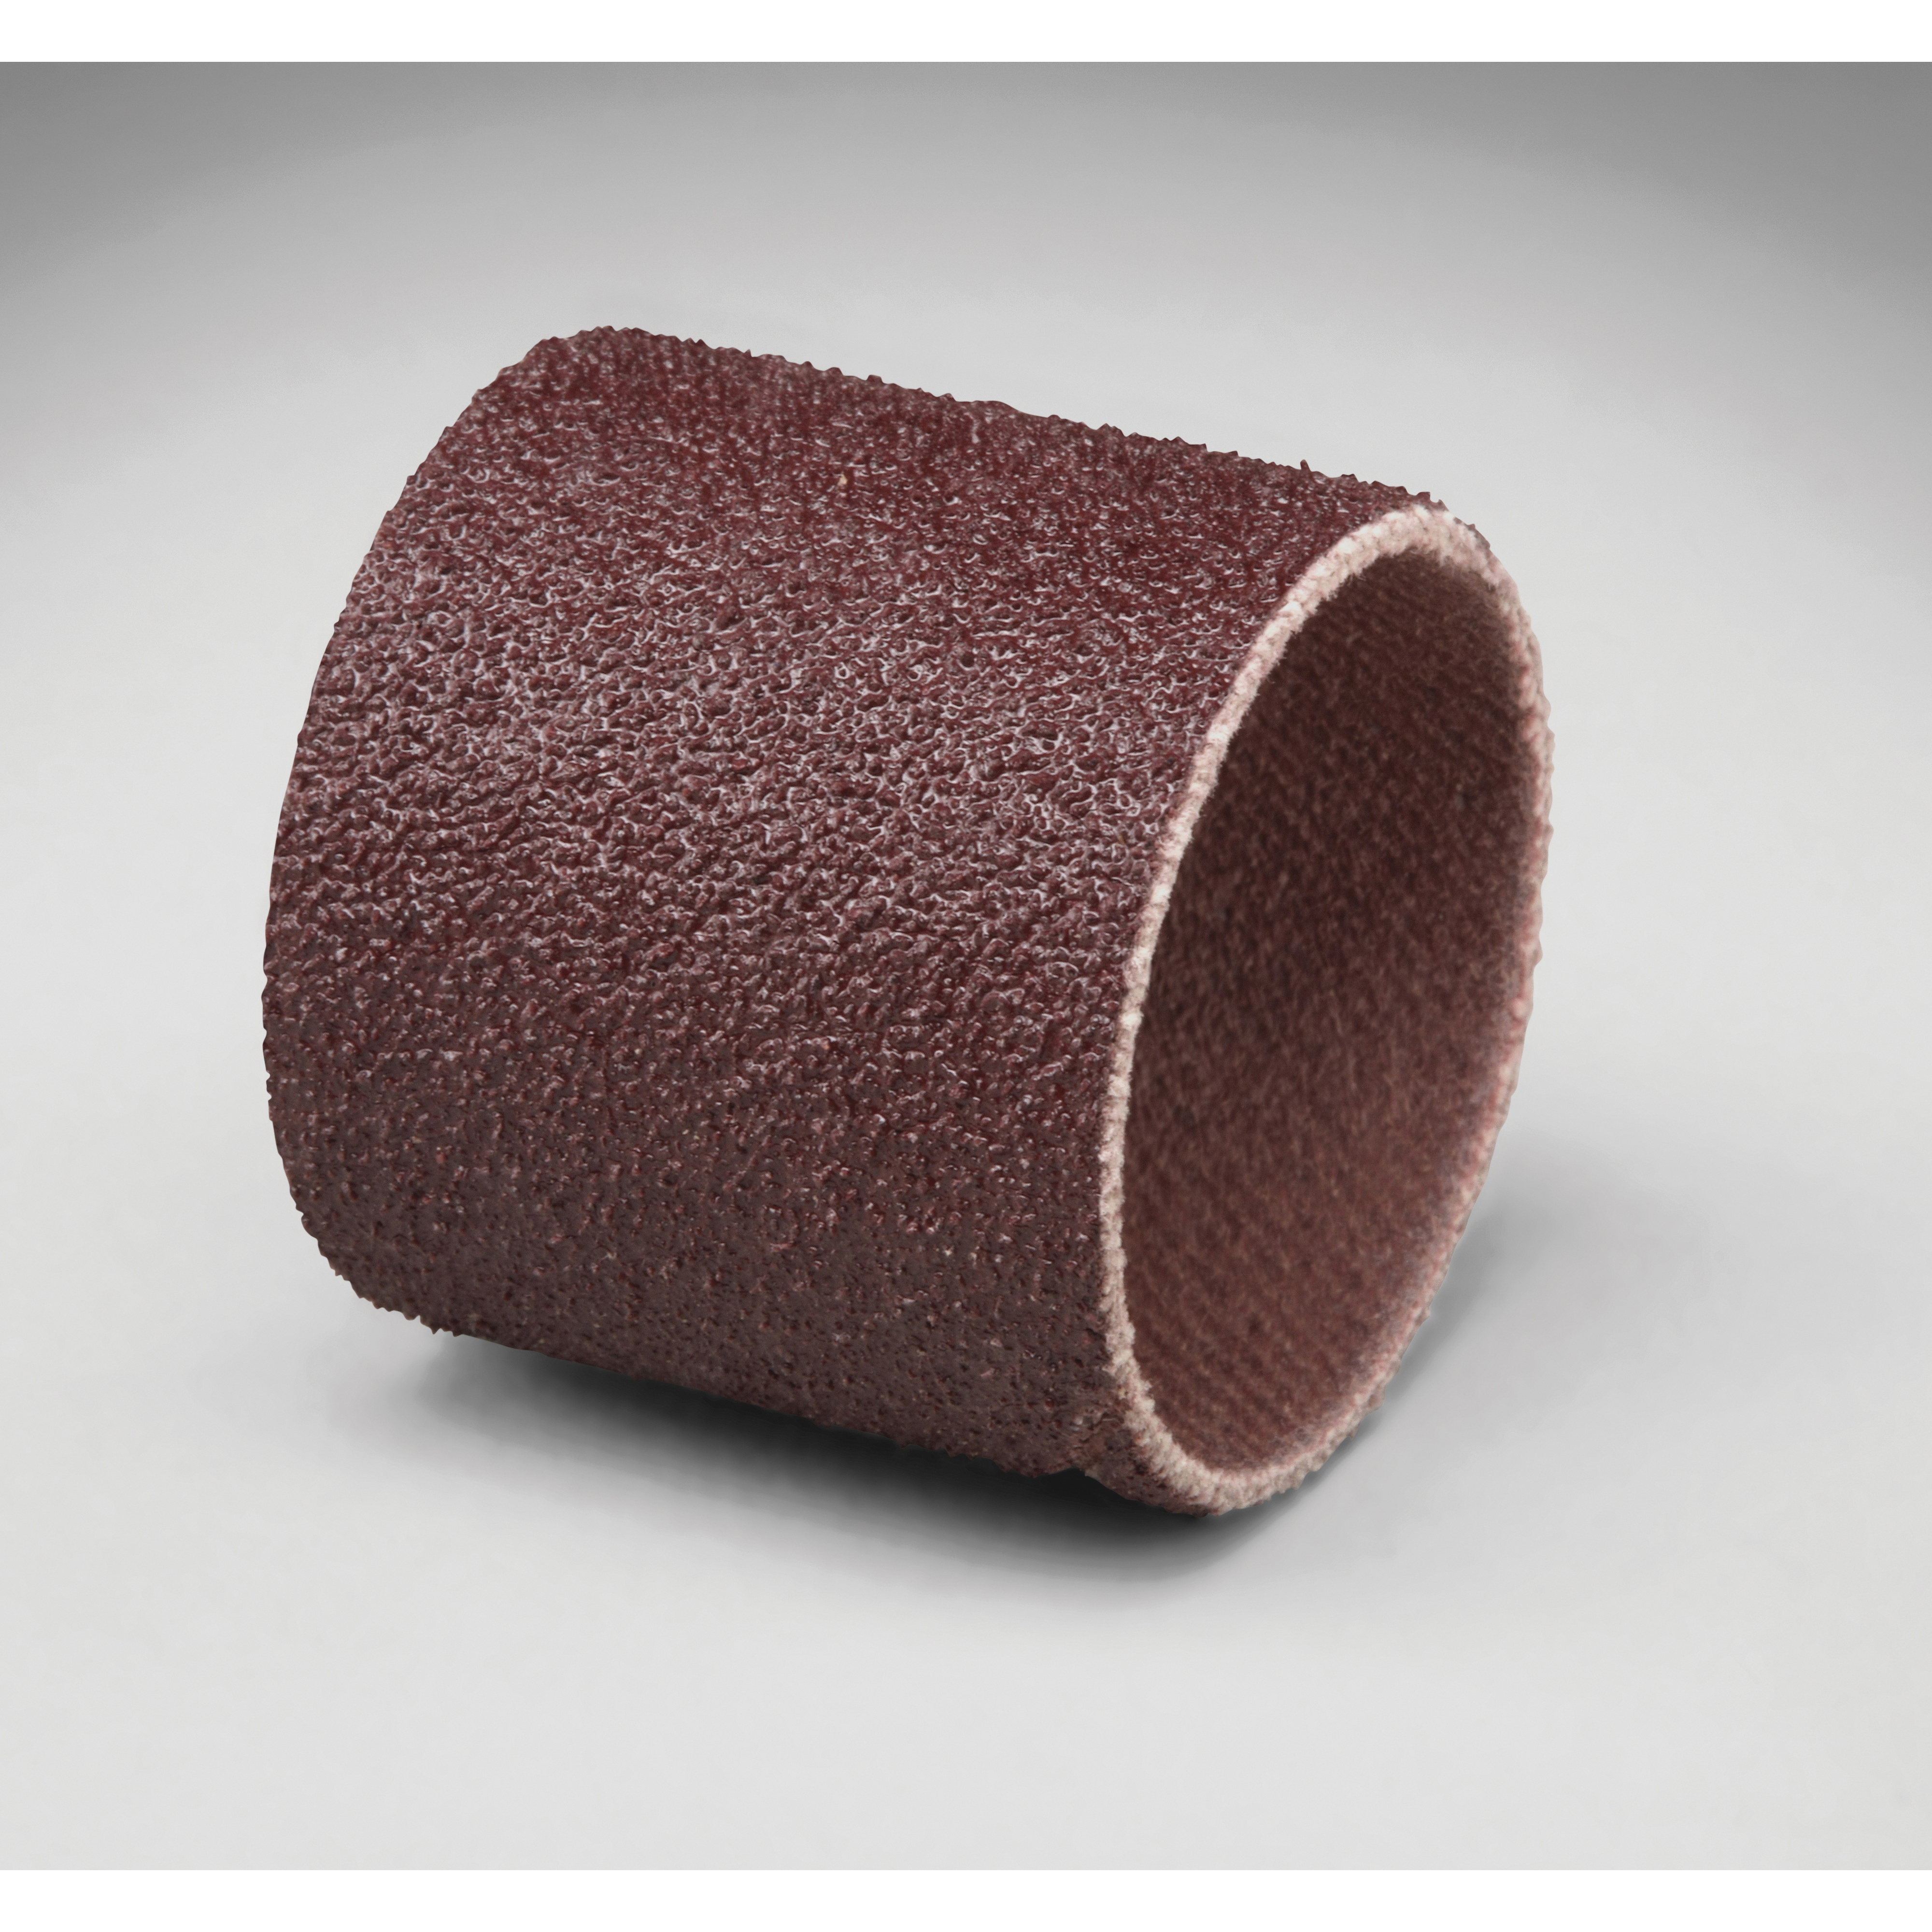 3M™ 051144-40213 341D Coated Band, 1 in Dia x 1 in L Band, 40 Grit, Coarse Grade, Aluminum Oxide Abrasive